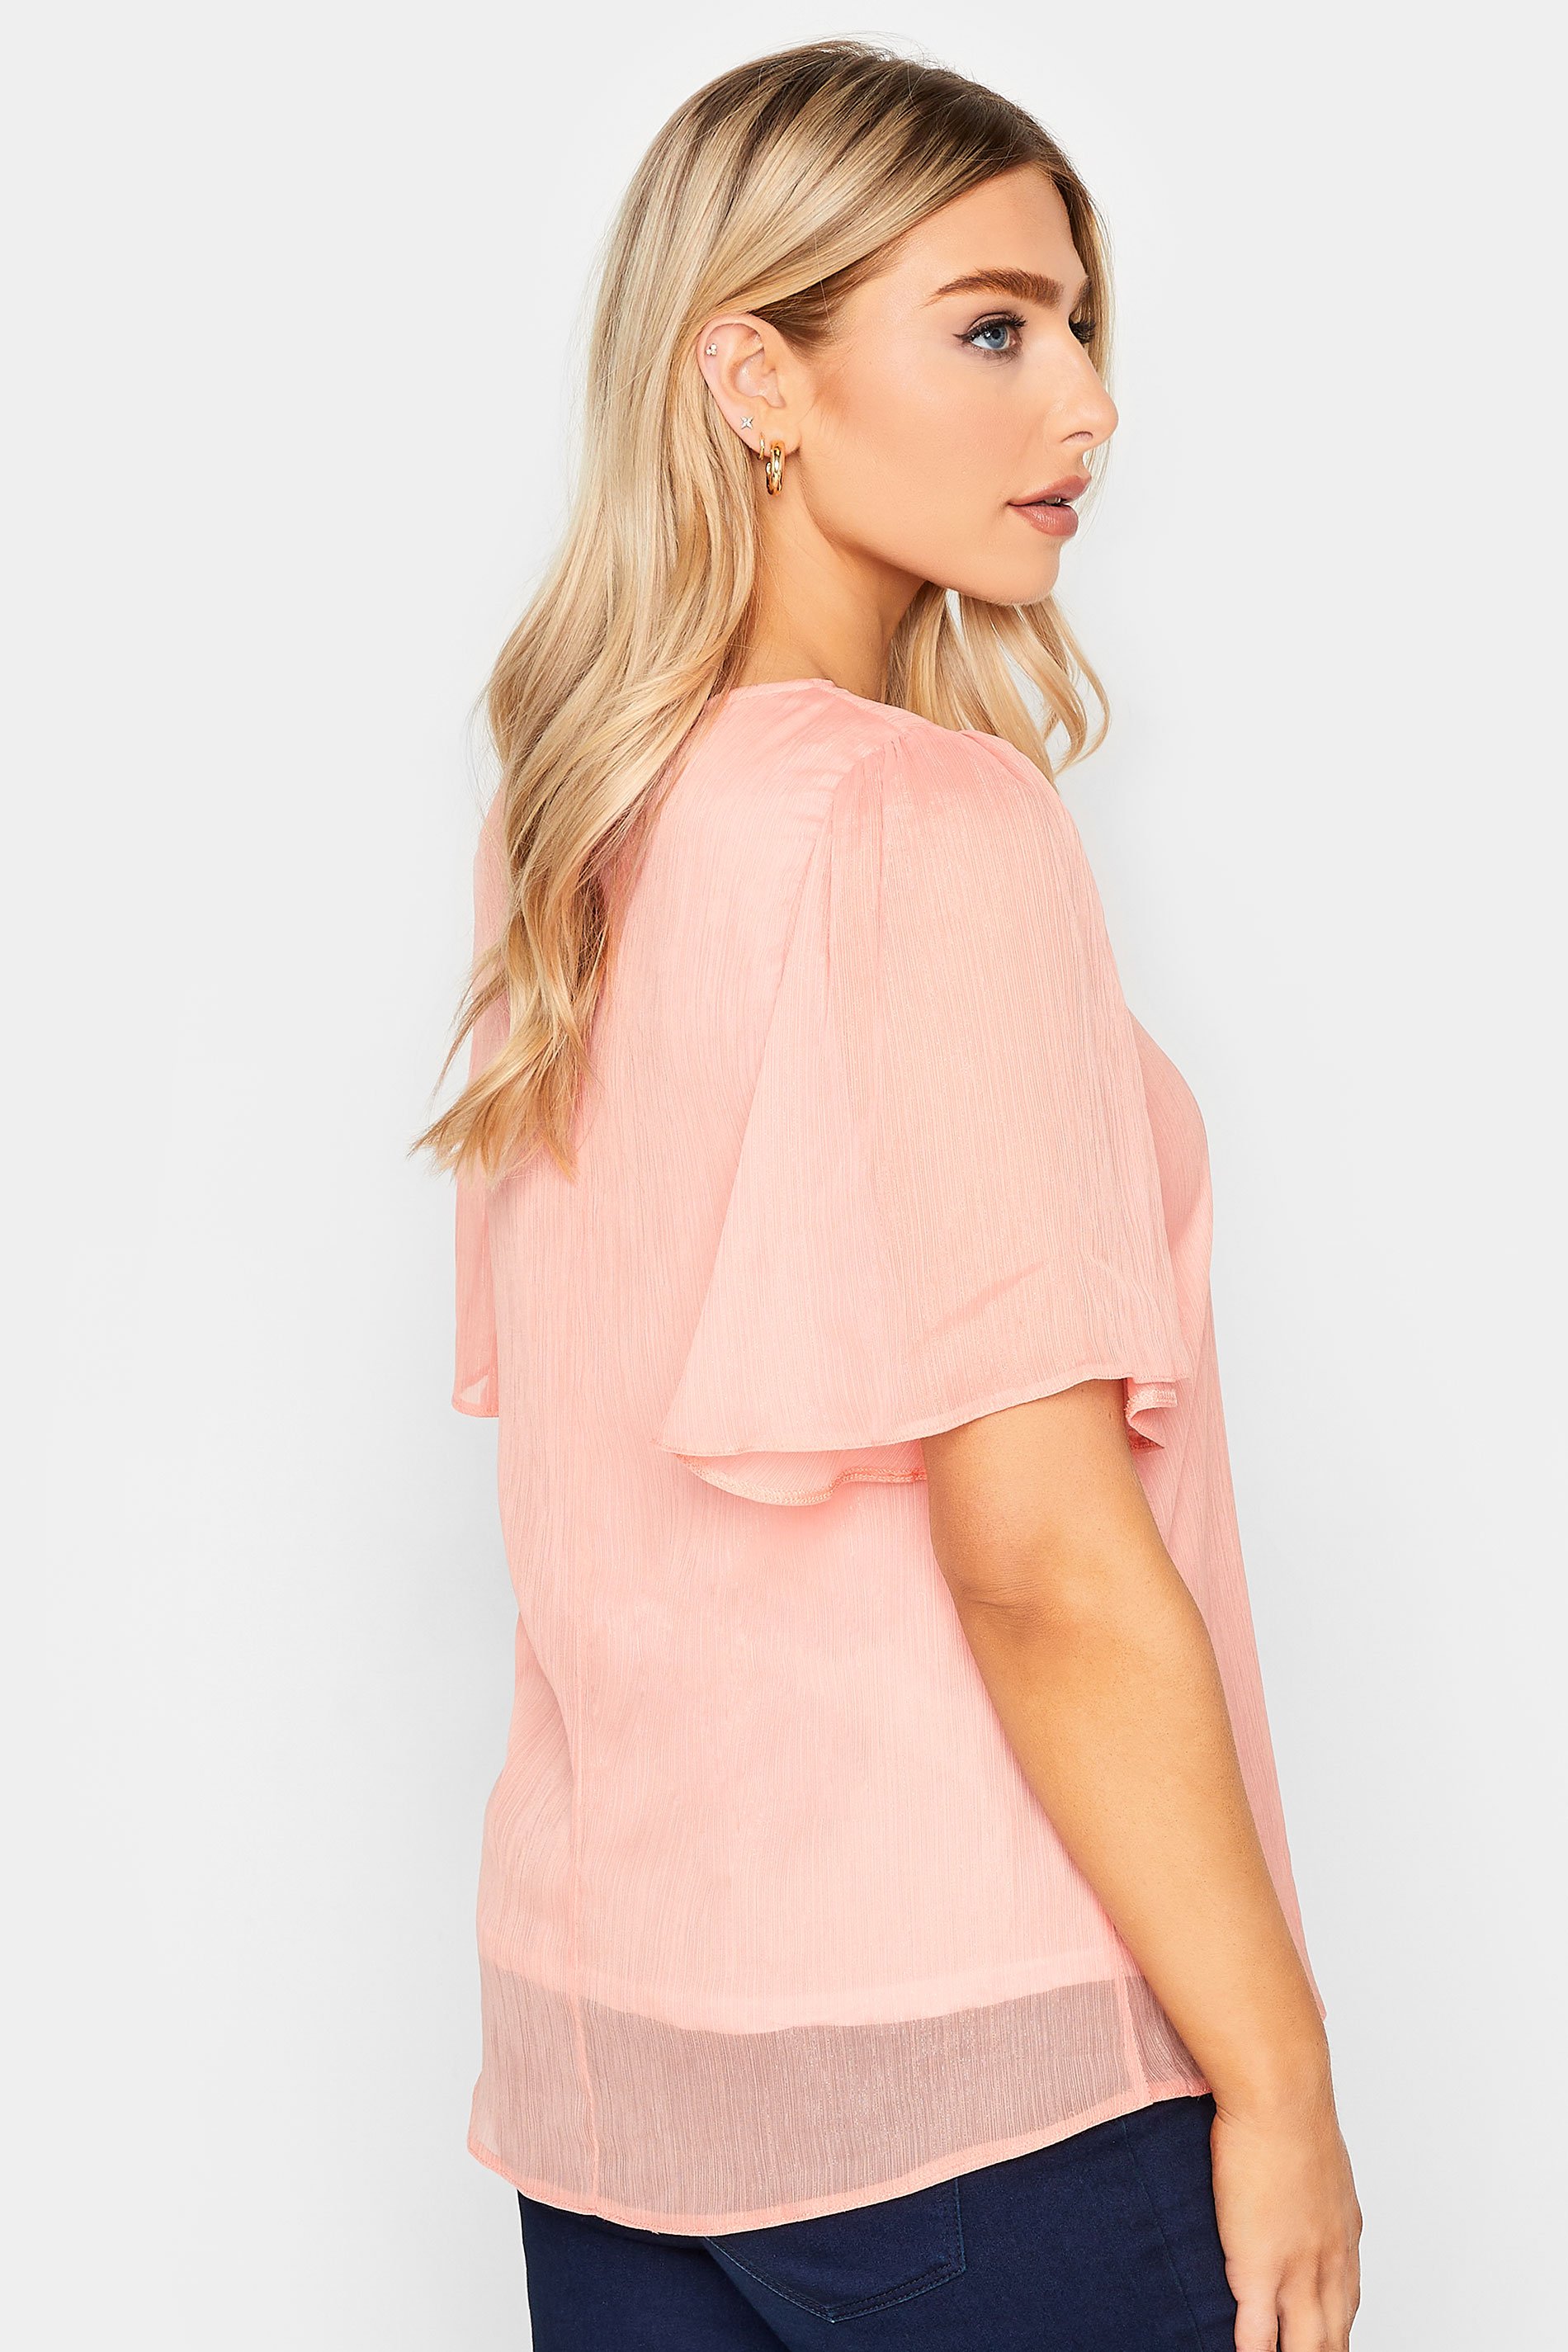 M&Co Pink Shimmer Angel Sleeve Blouse | M&Co 3